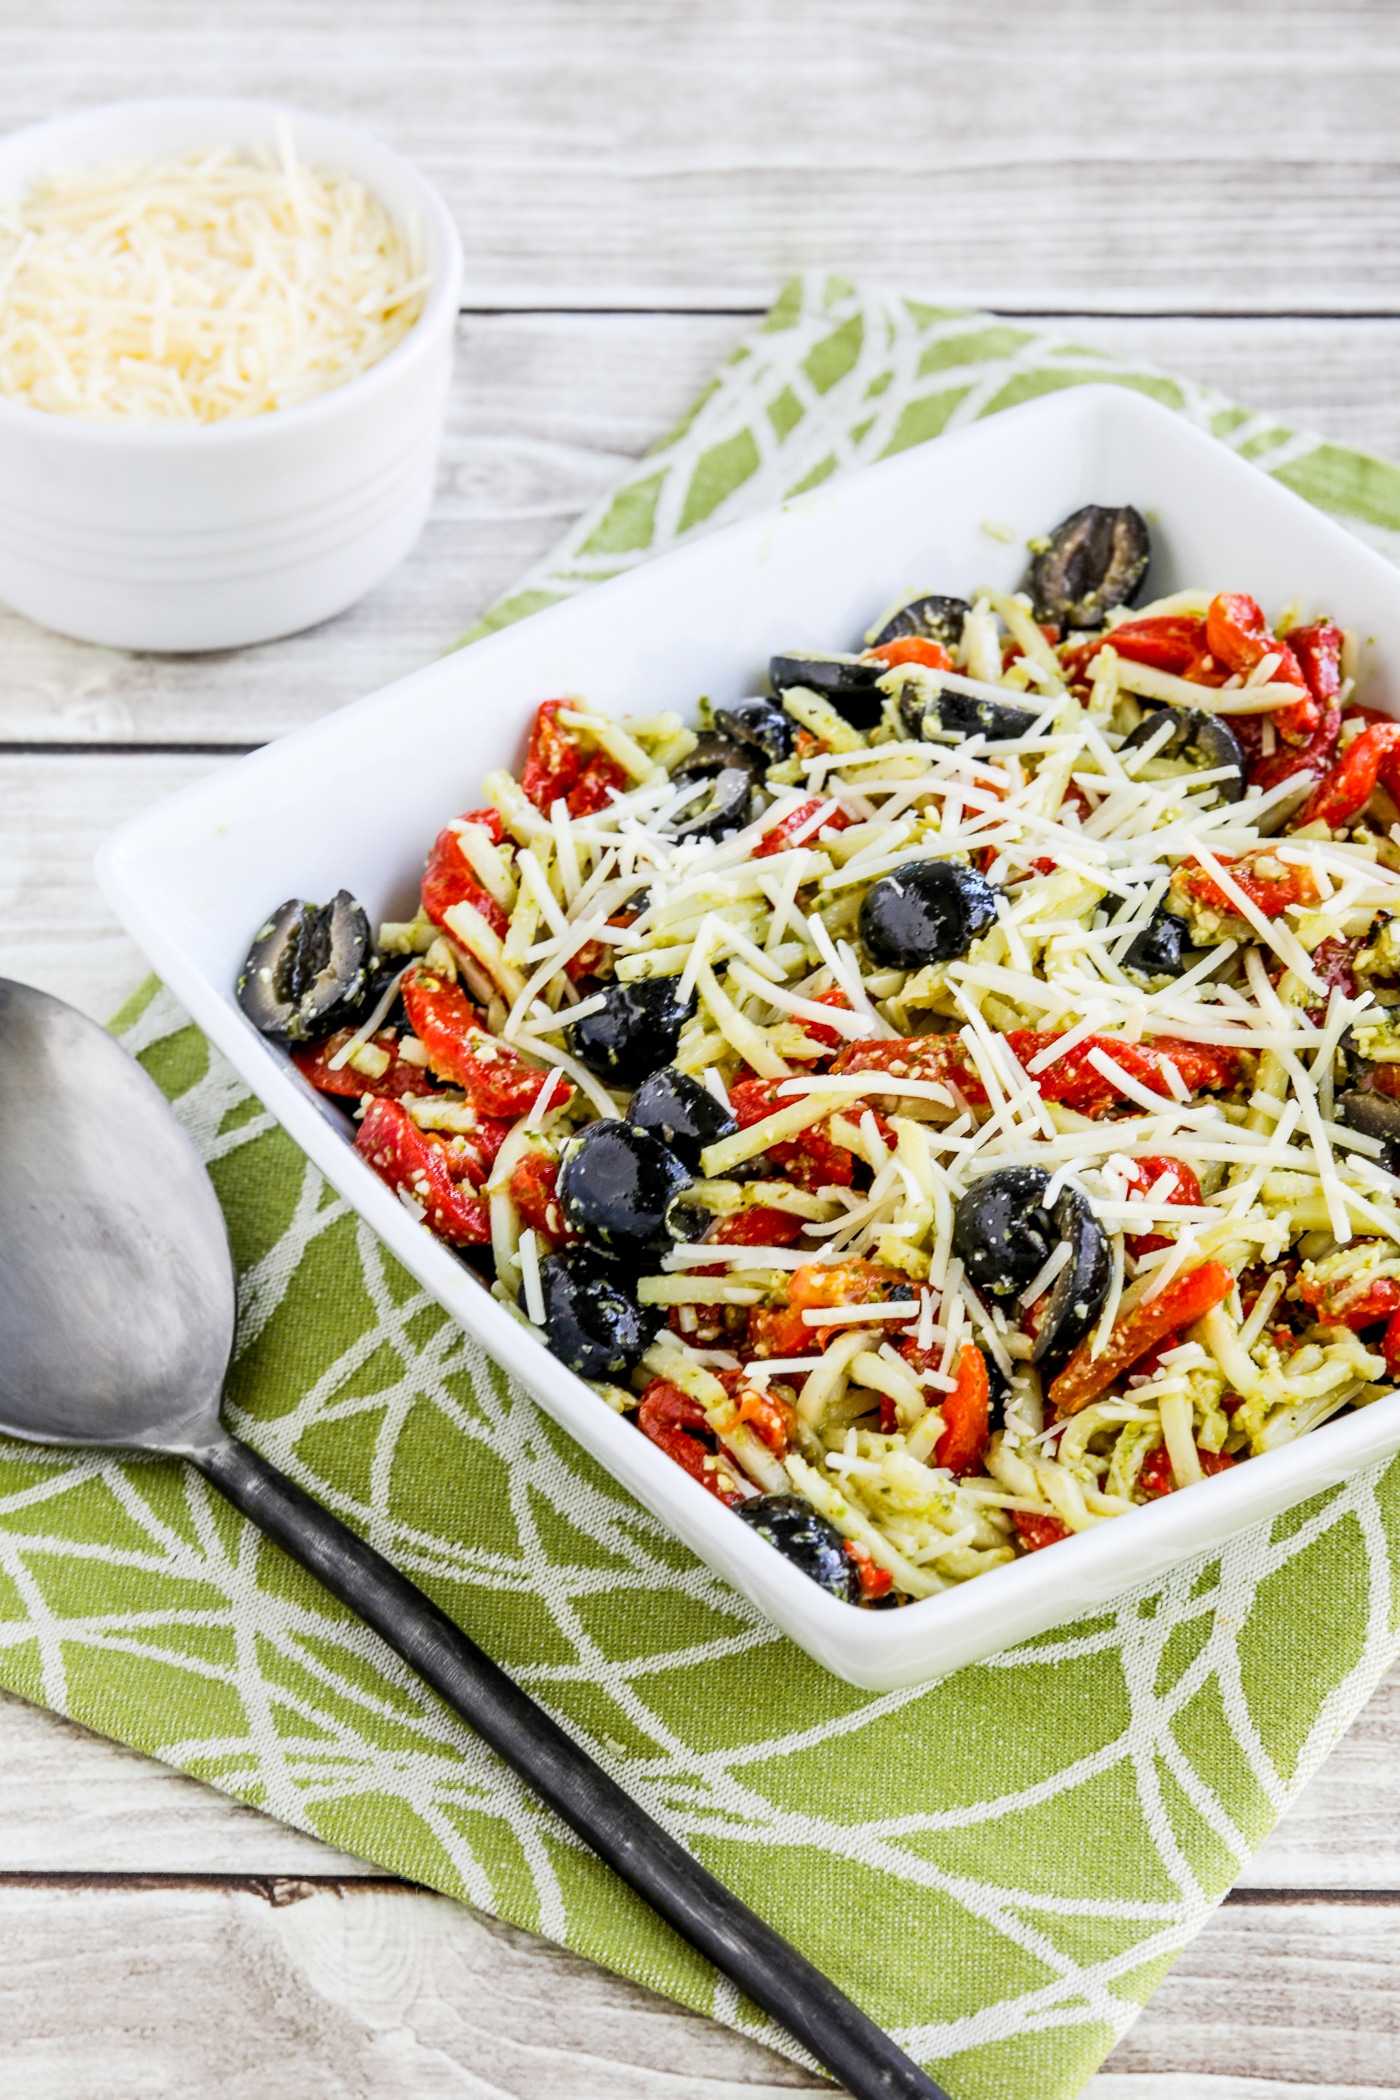 Pesto Pasta Salad in serving bowl, low-carb version made with Palmini pasta